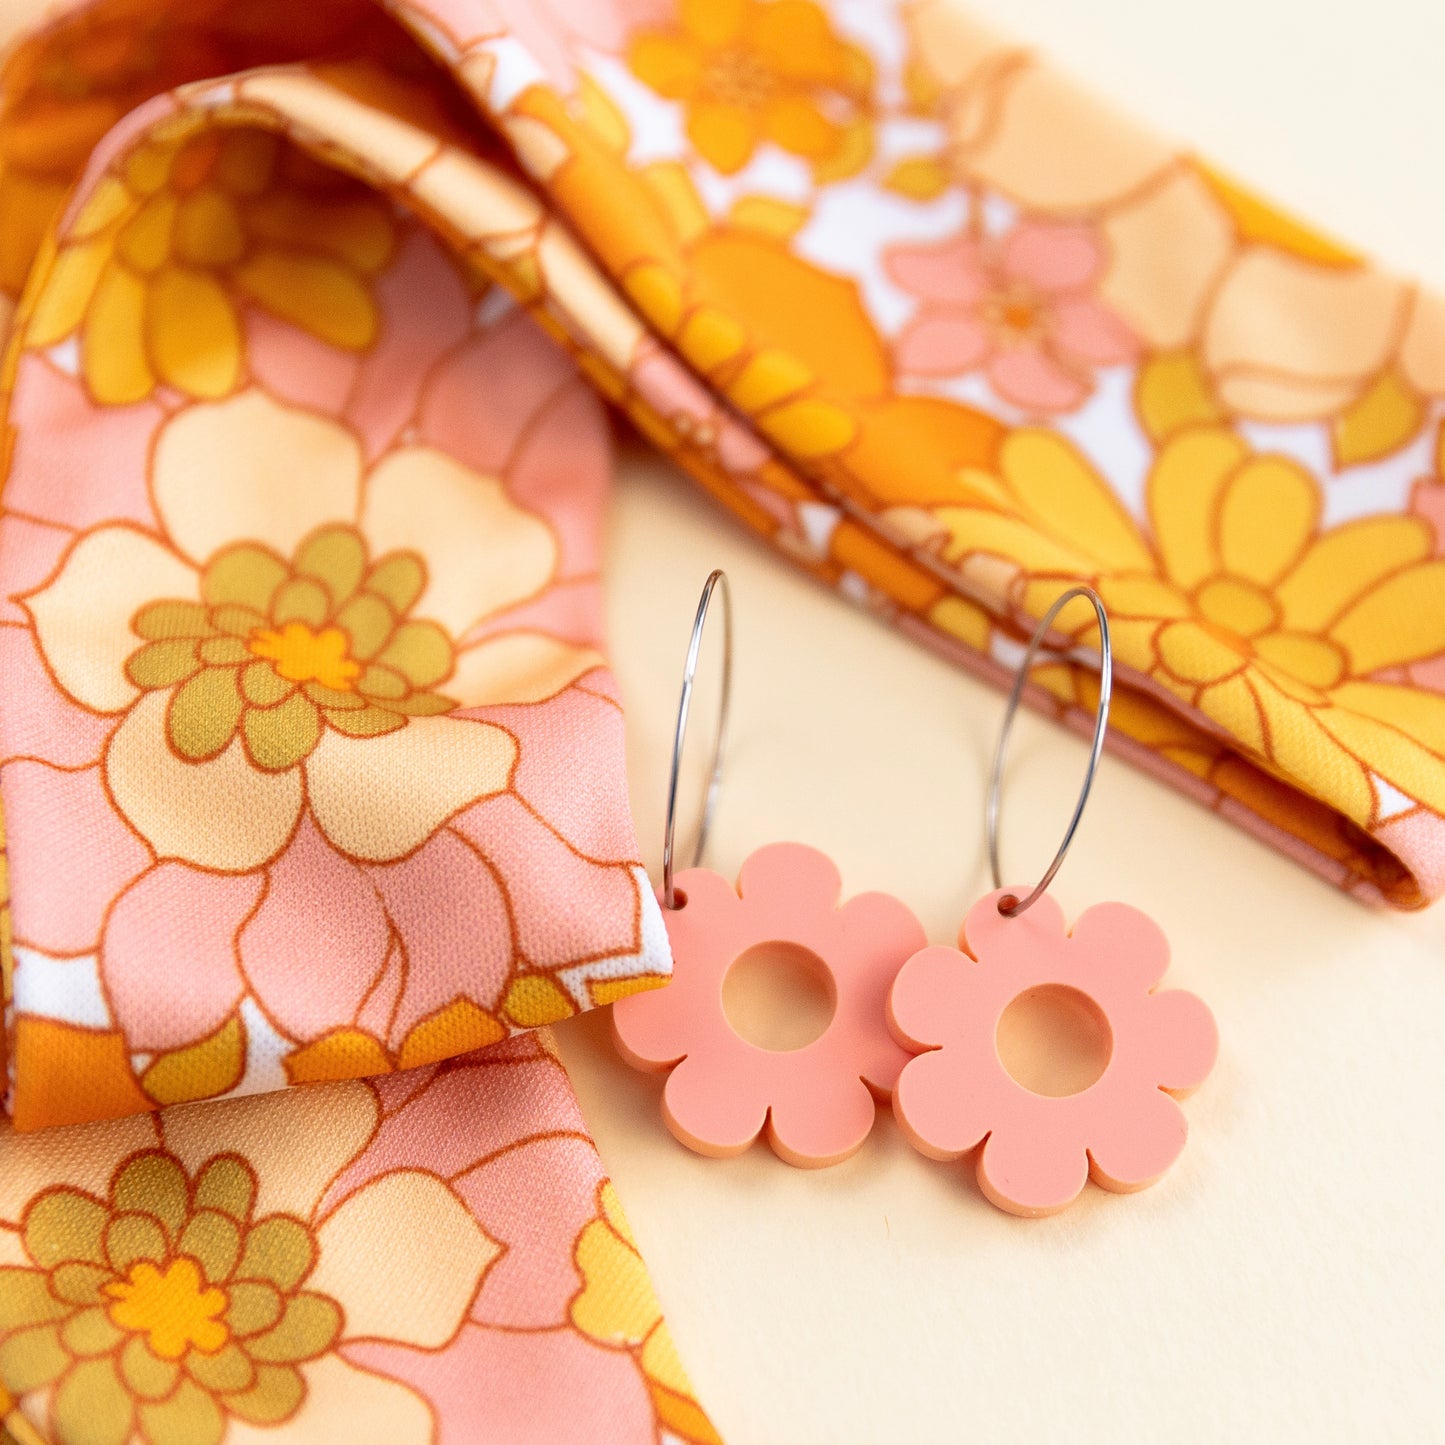 THE BEST EARRINGS/HEADBAND GIFT SET in Grandma’s Floral + Daisy Hoops/ Statement Accessories